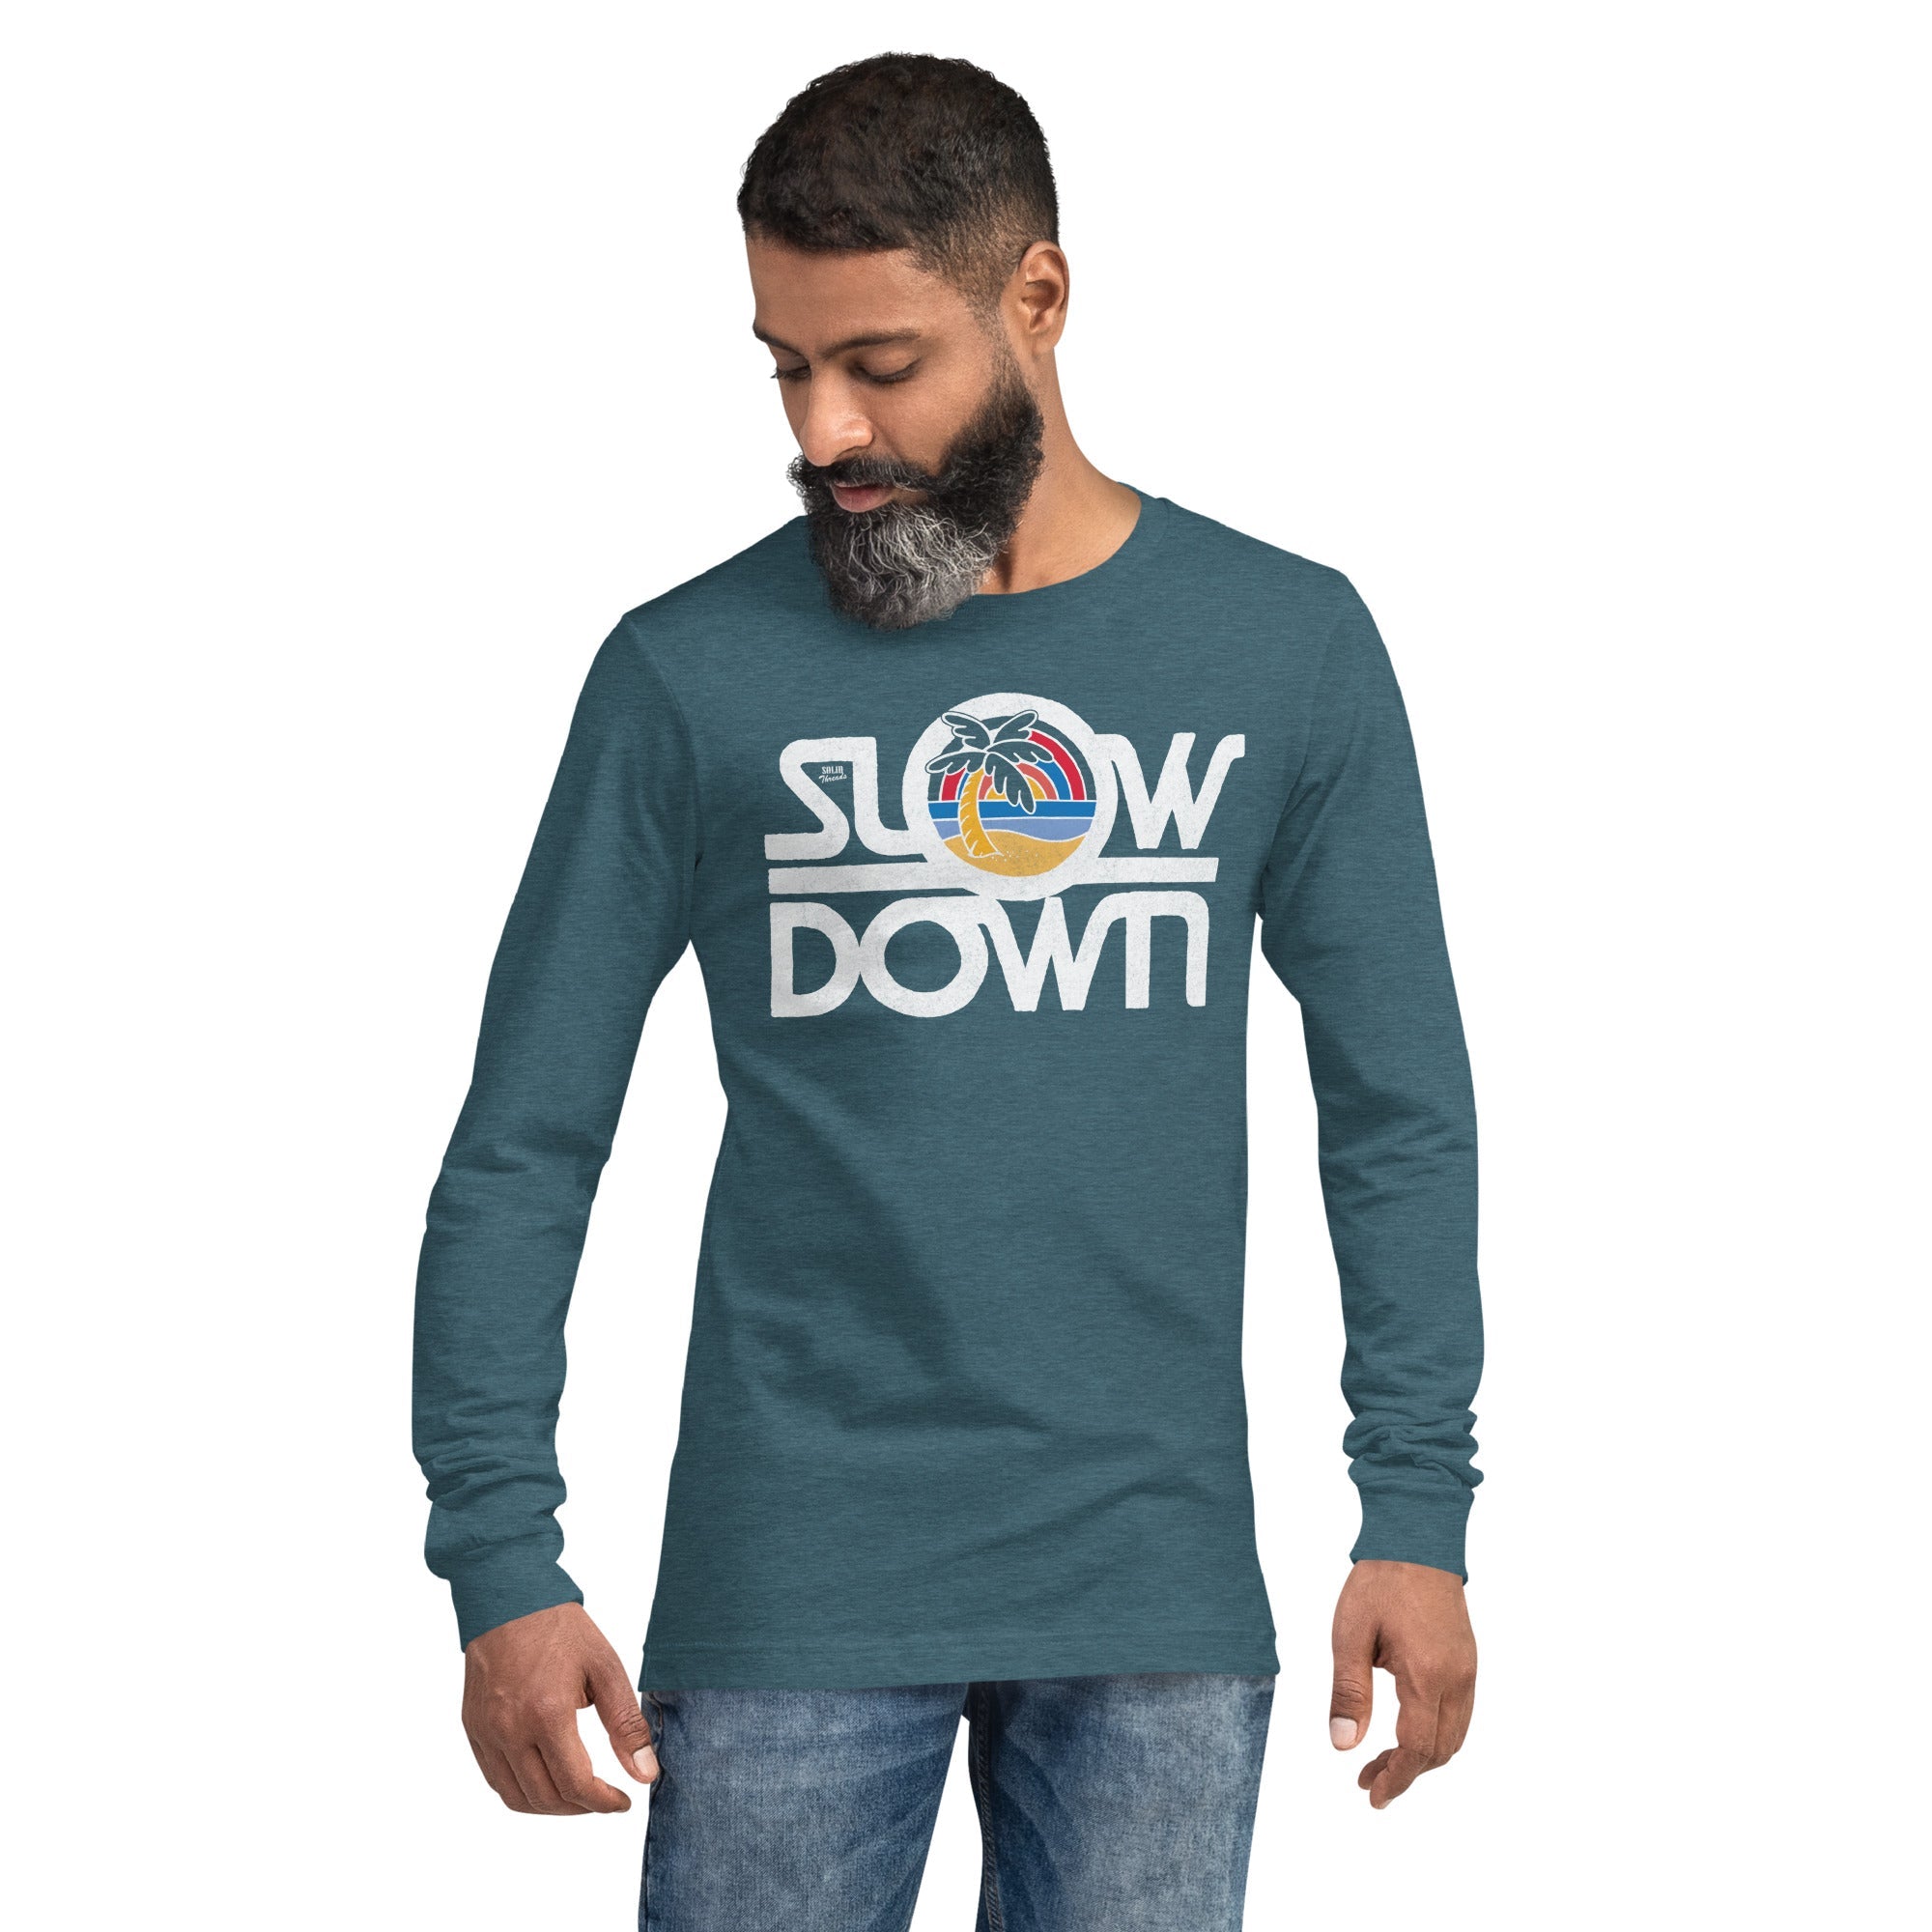 Slow Down Vintage Long Sleeve Tee | Retro Beach Vacation Soft Blend Green T-shirt on Model | SOLID THREADS